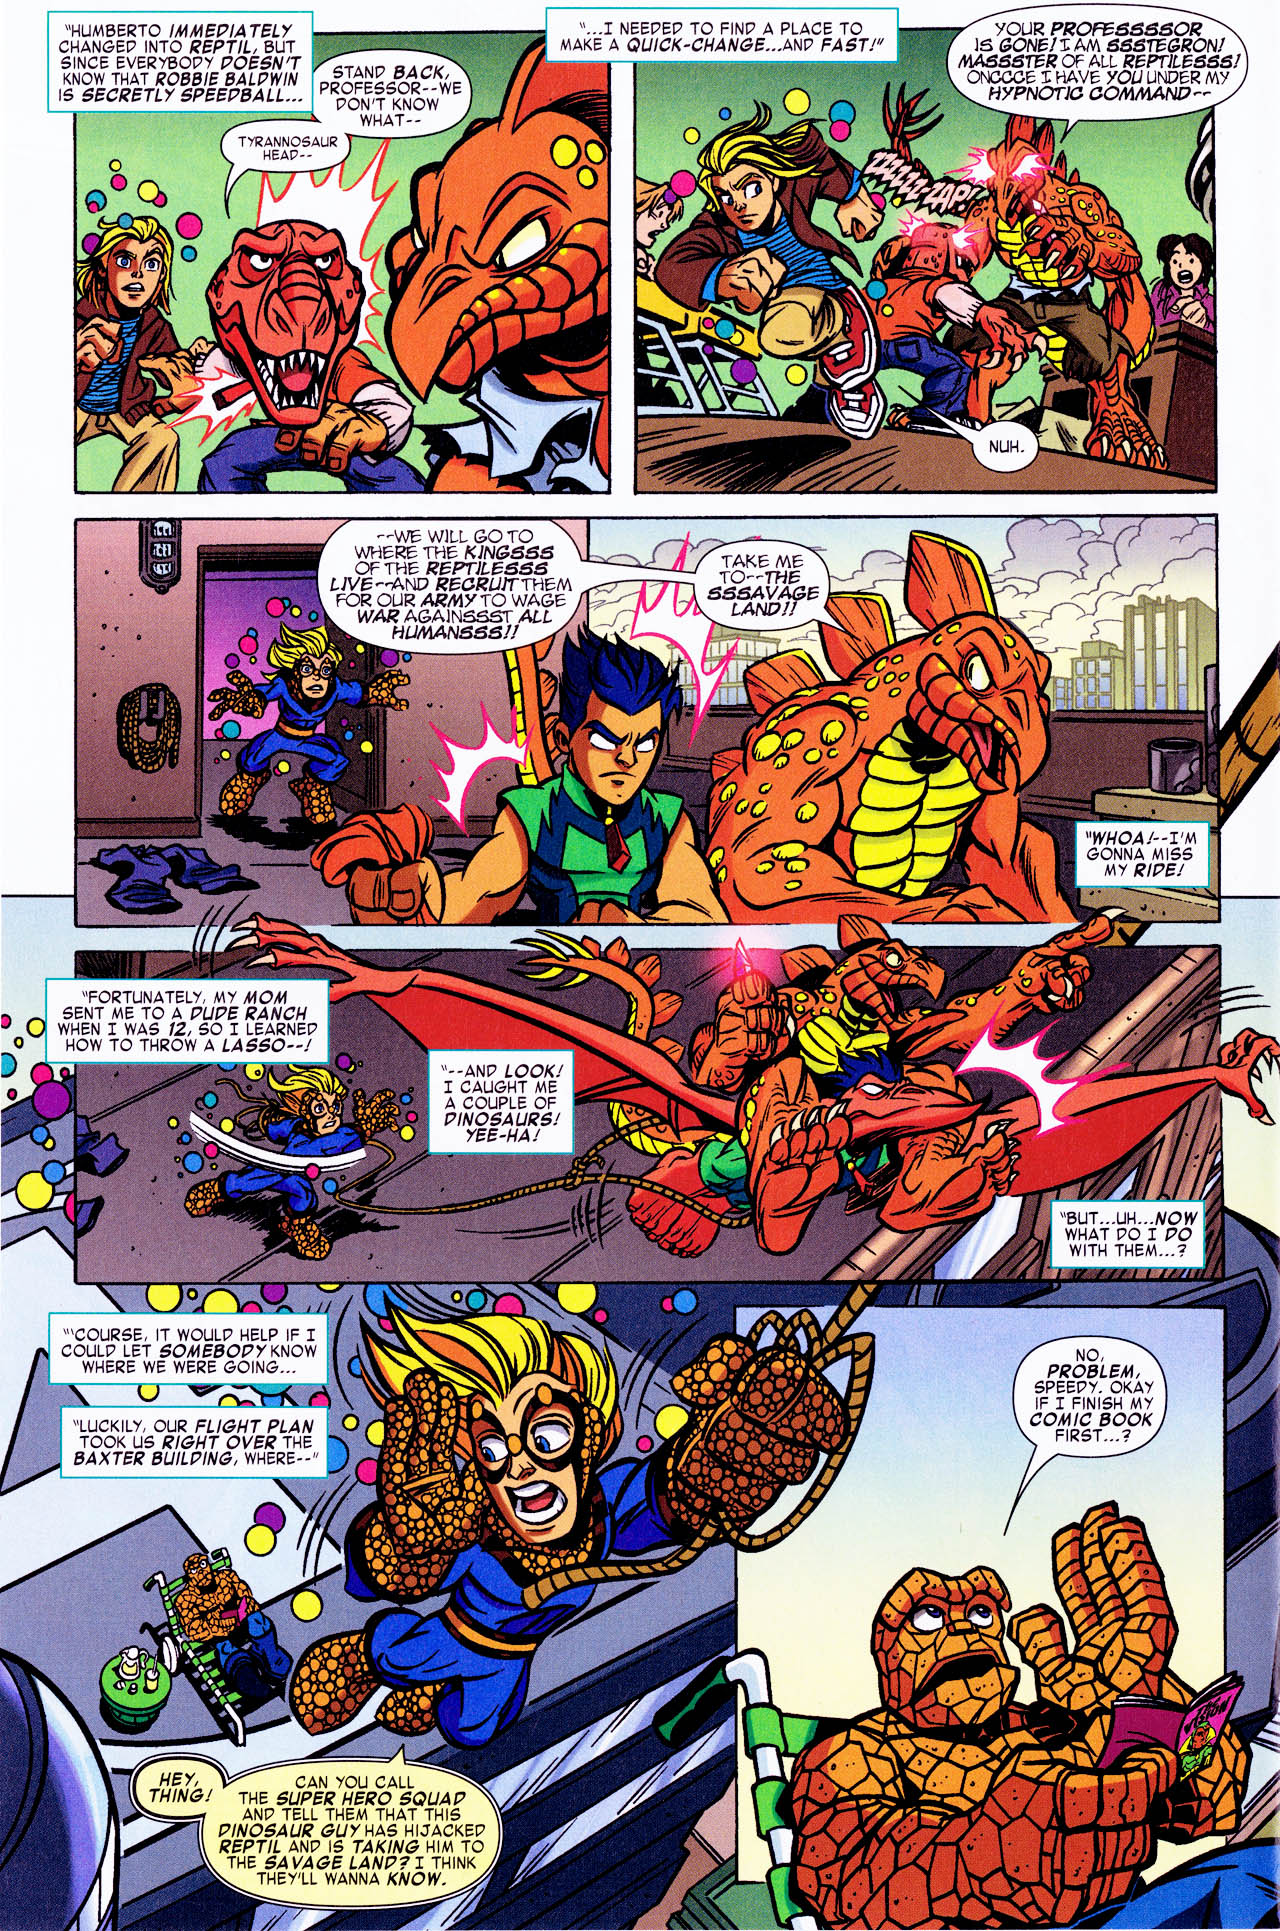 Super Hero Squad Issue 6 | Read Super Hero Squad Issue 6 comic online in  high quality. Read Full Comic online for free - Read comics online in high  quality .| READ COMIC ONLINE